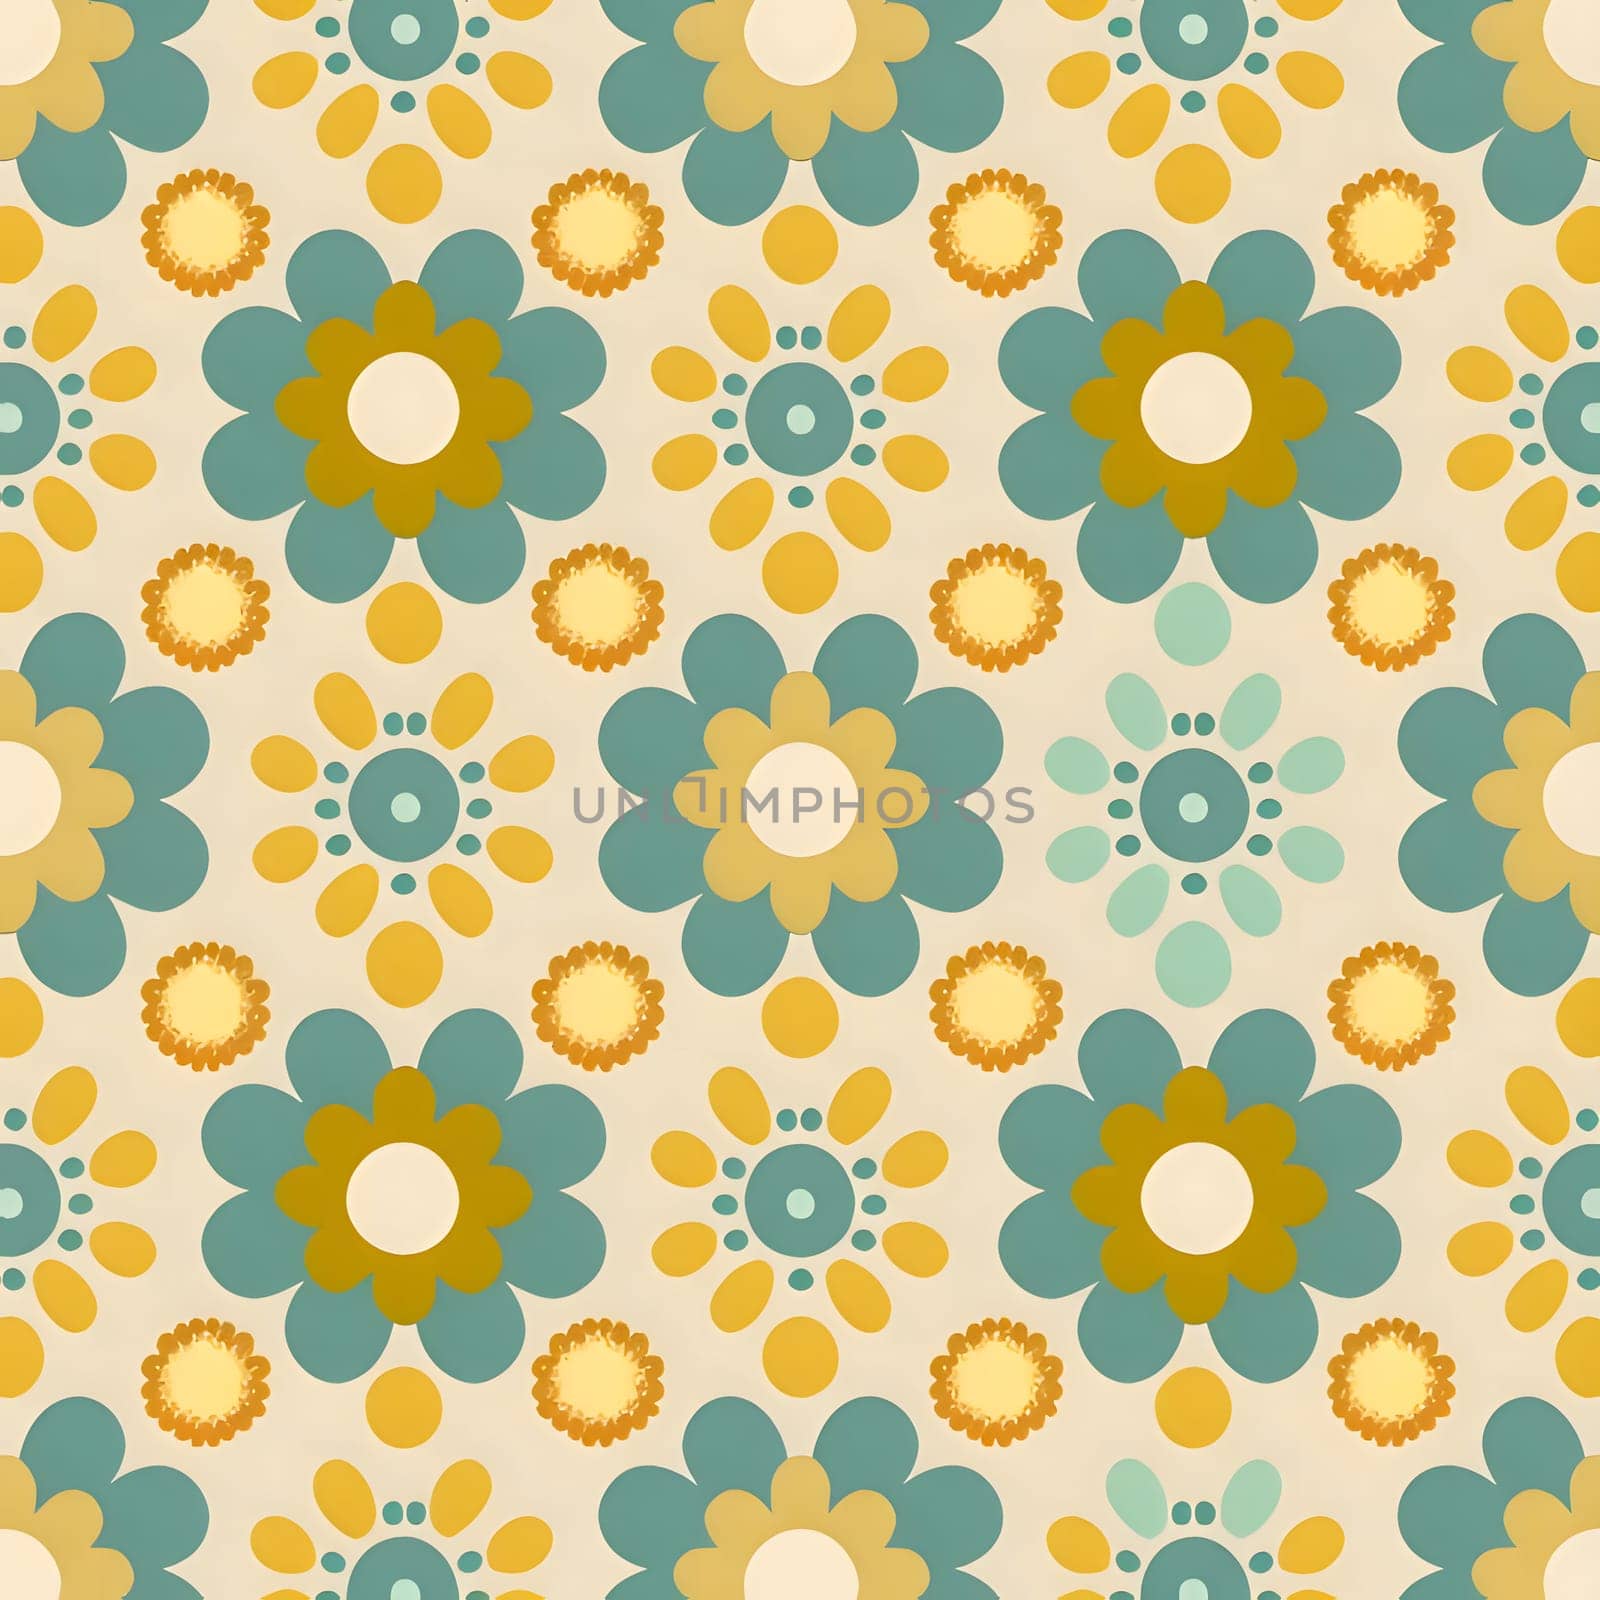 Patterns and banners backgrounds: Seamless pattern with decorative flowers in pastel colors. Vector illustration.